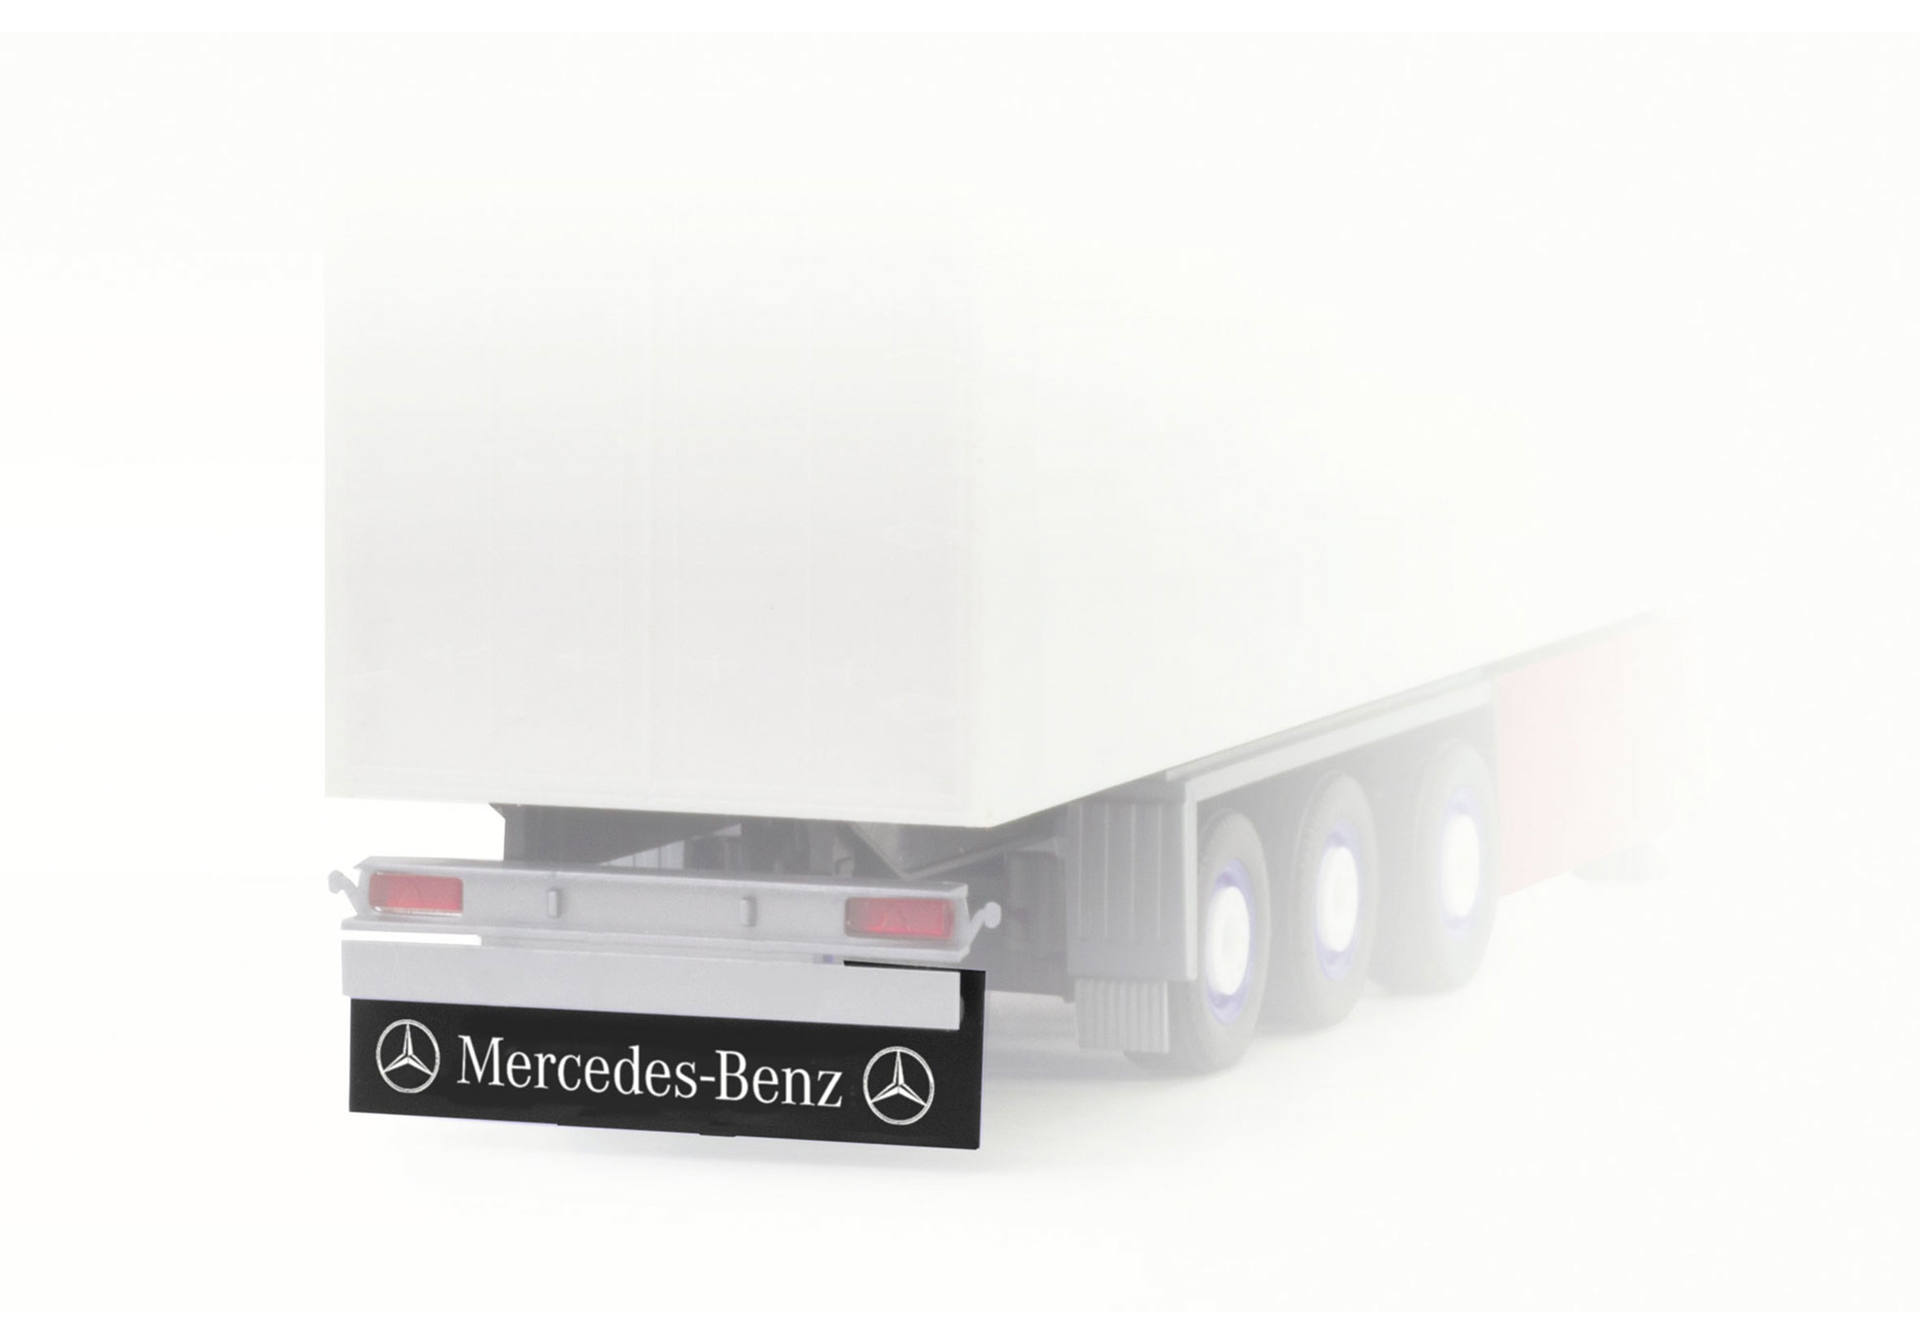 Accessory Rear splash flap for trailer and trucks "Mercedes-Benz" (8 pieces)